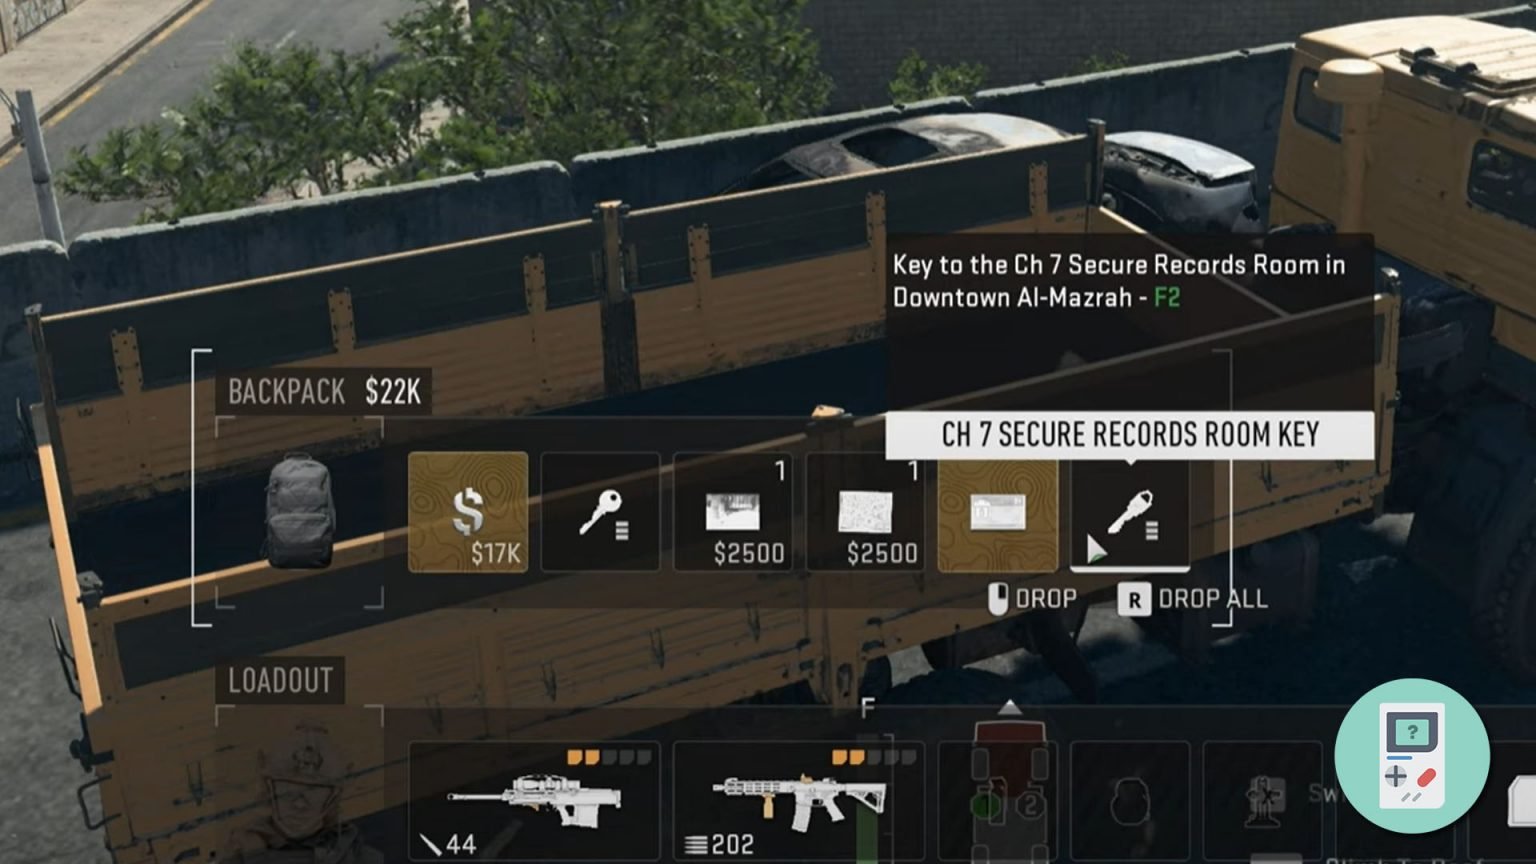 ch 7 secure record room key dmz Where to use the CH 7 Secure Records Room key in DMZ | CH 7 Secure Records Room loot location